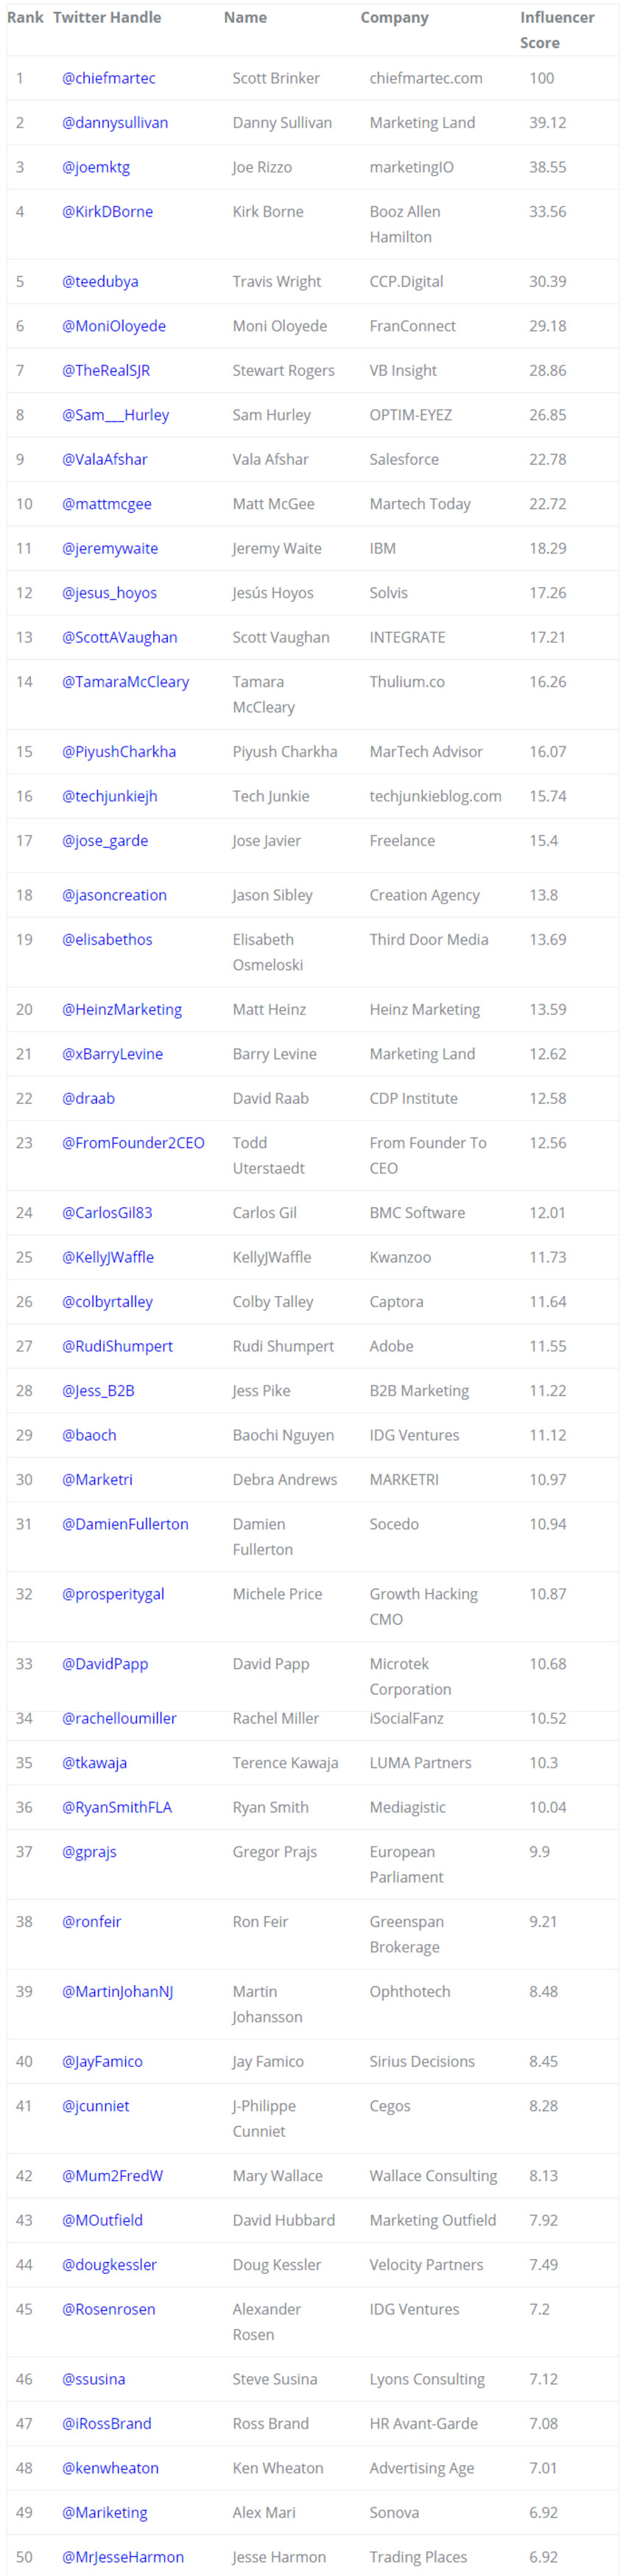 MarTech: Top 100 Influencers and Brands - Onalytica | The MarTech Digest | Scoop.it